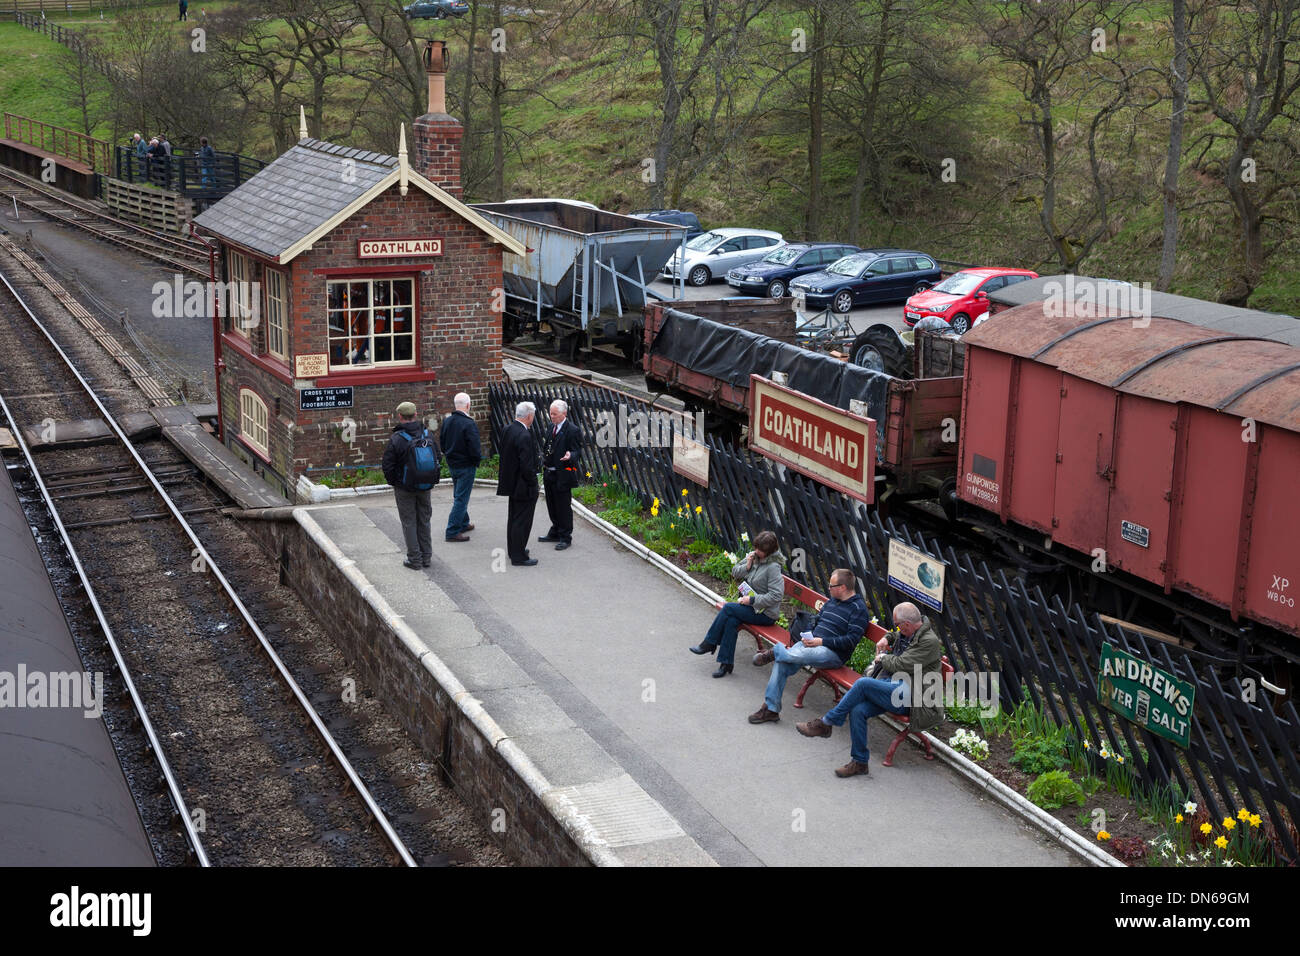 People Waiting for a Train on the Platform of Goathland Railway Station North Yorks Moor Railway Yorkshire UK Stock Photo